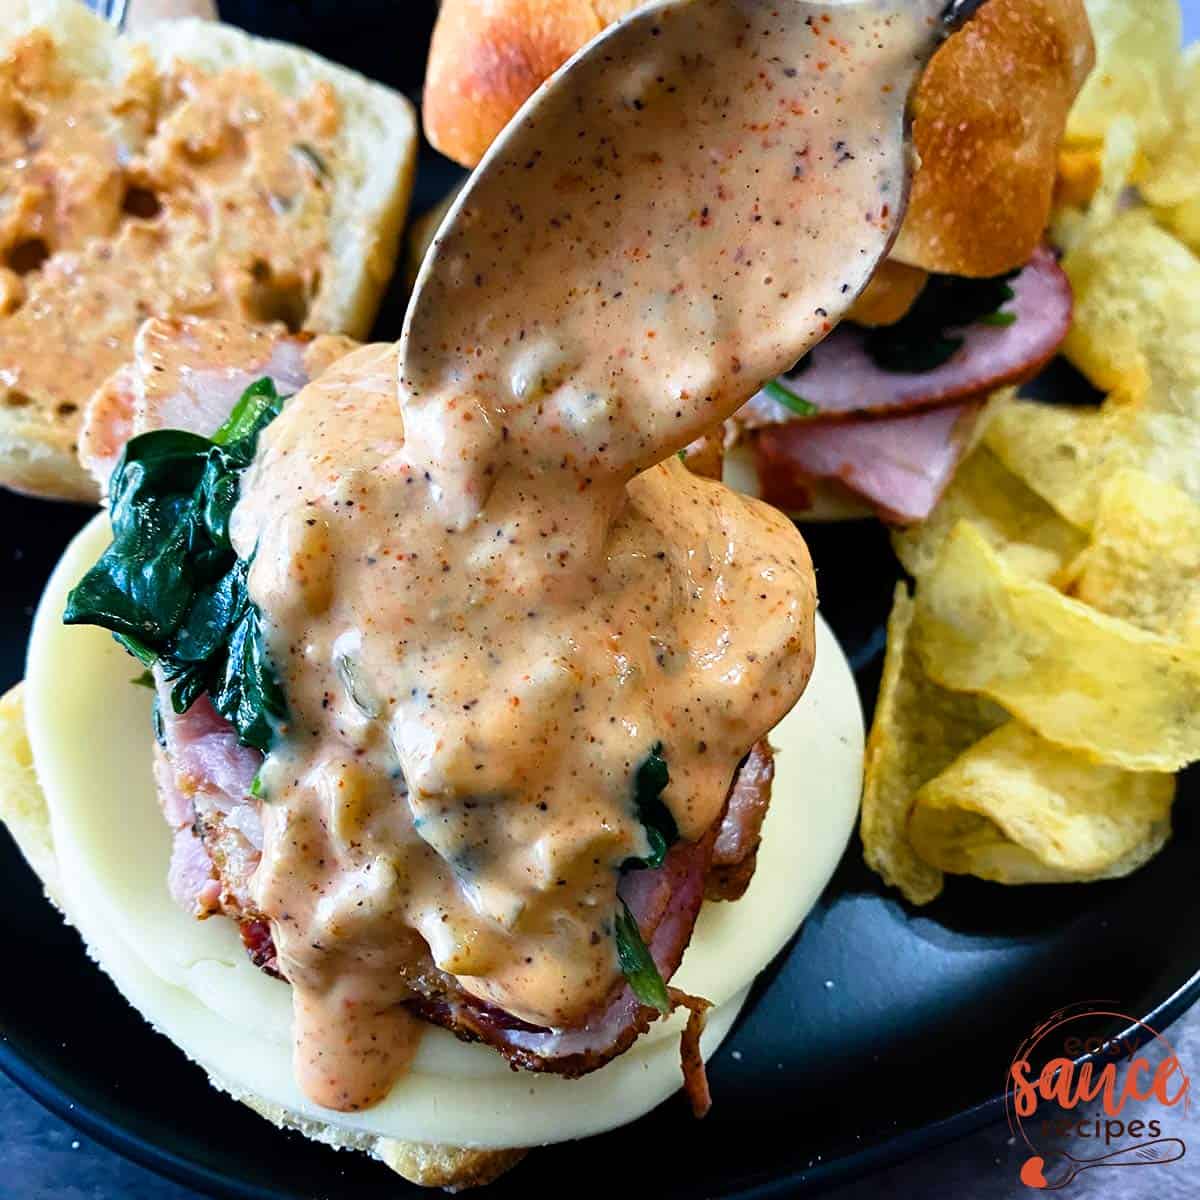 Spooning remoulade sauce onto a philly pork sandwich